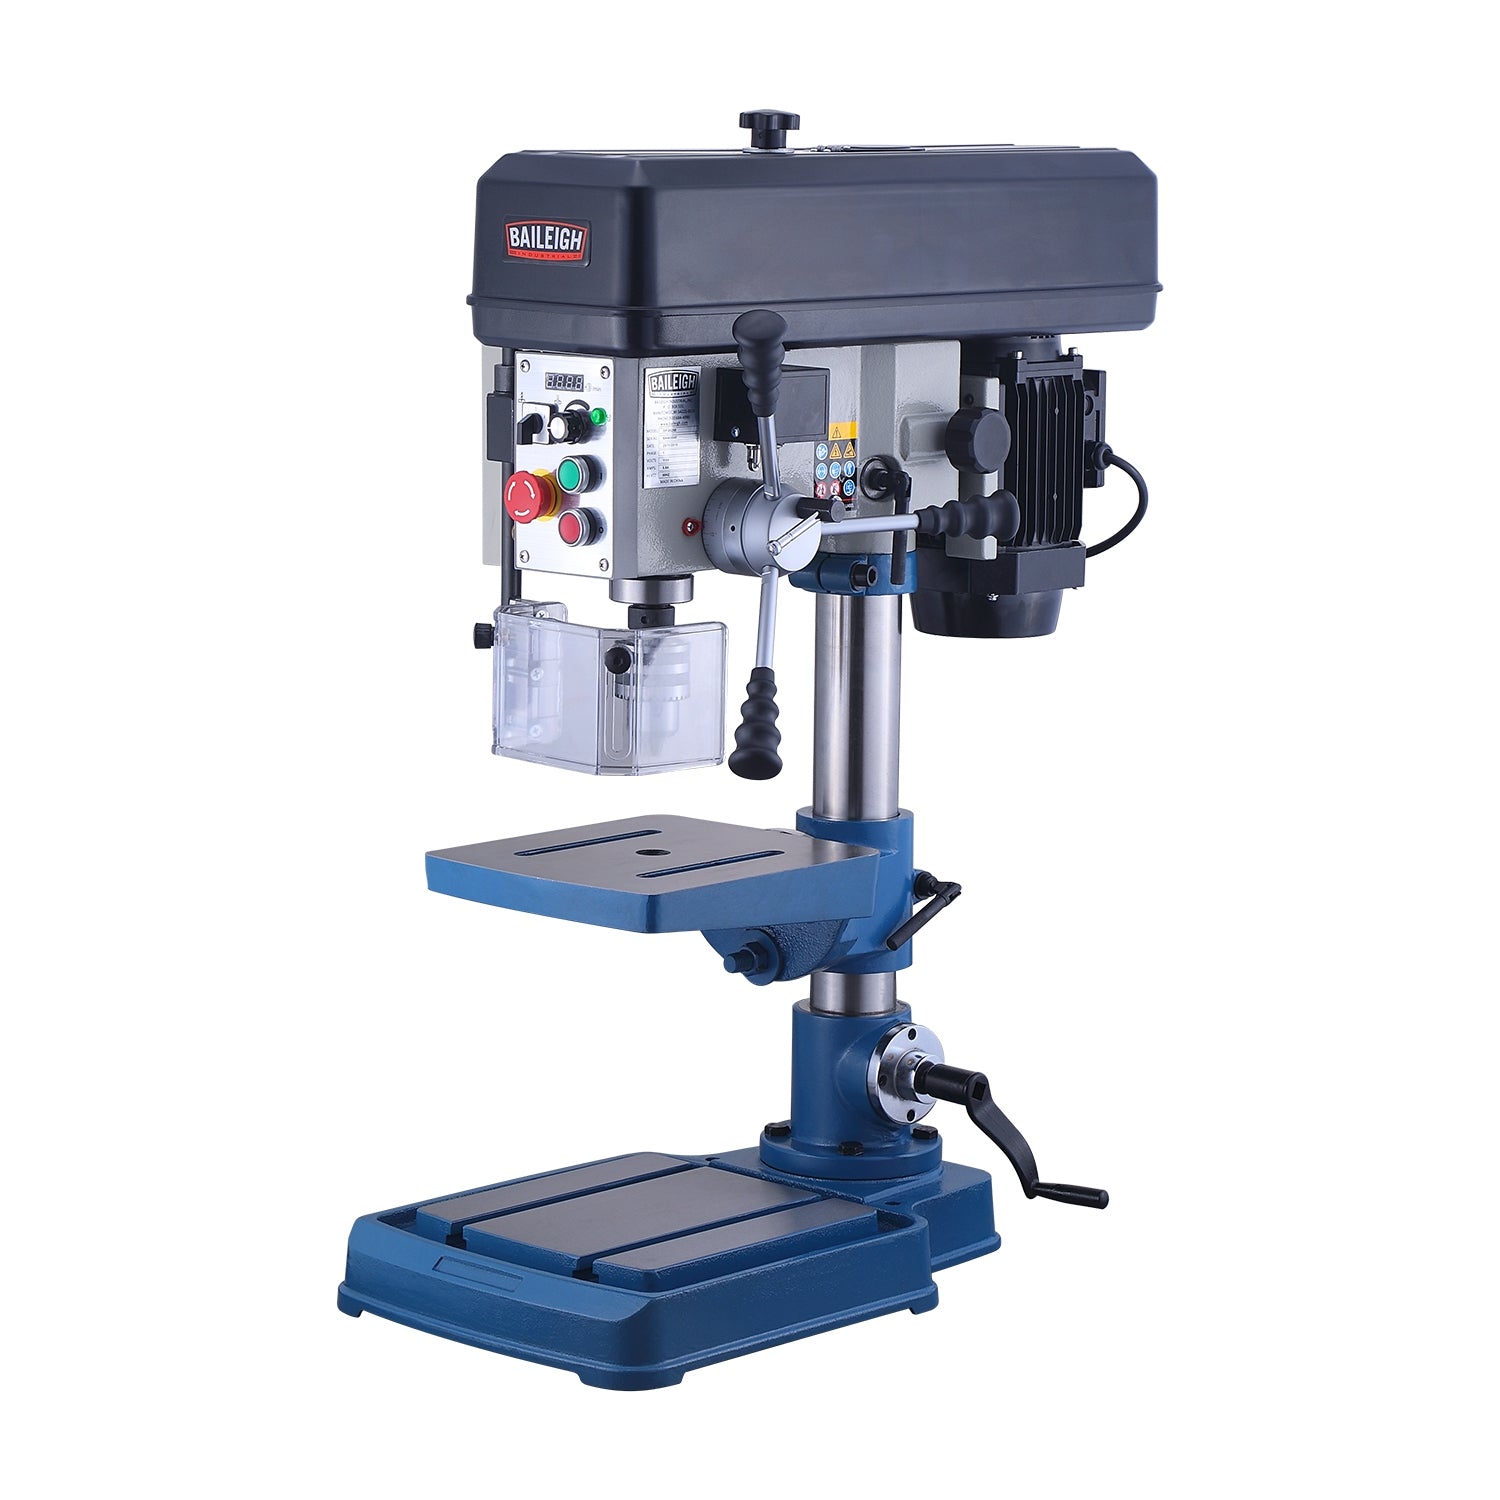 Baileigh DP-4016B-VS 110V 16", Variable Speed Bench Top Drill Press, MT-2 Spindle